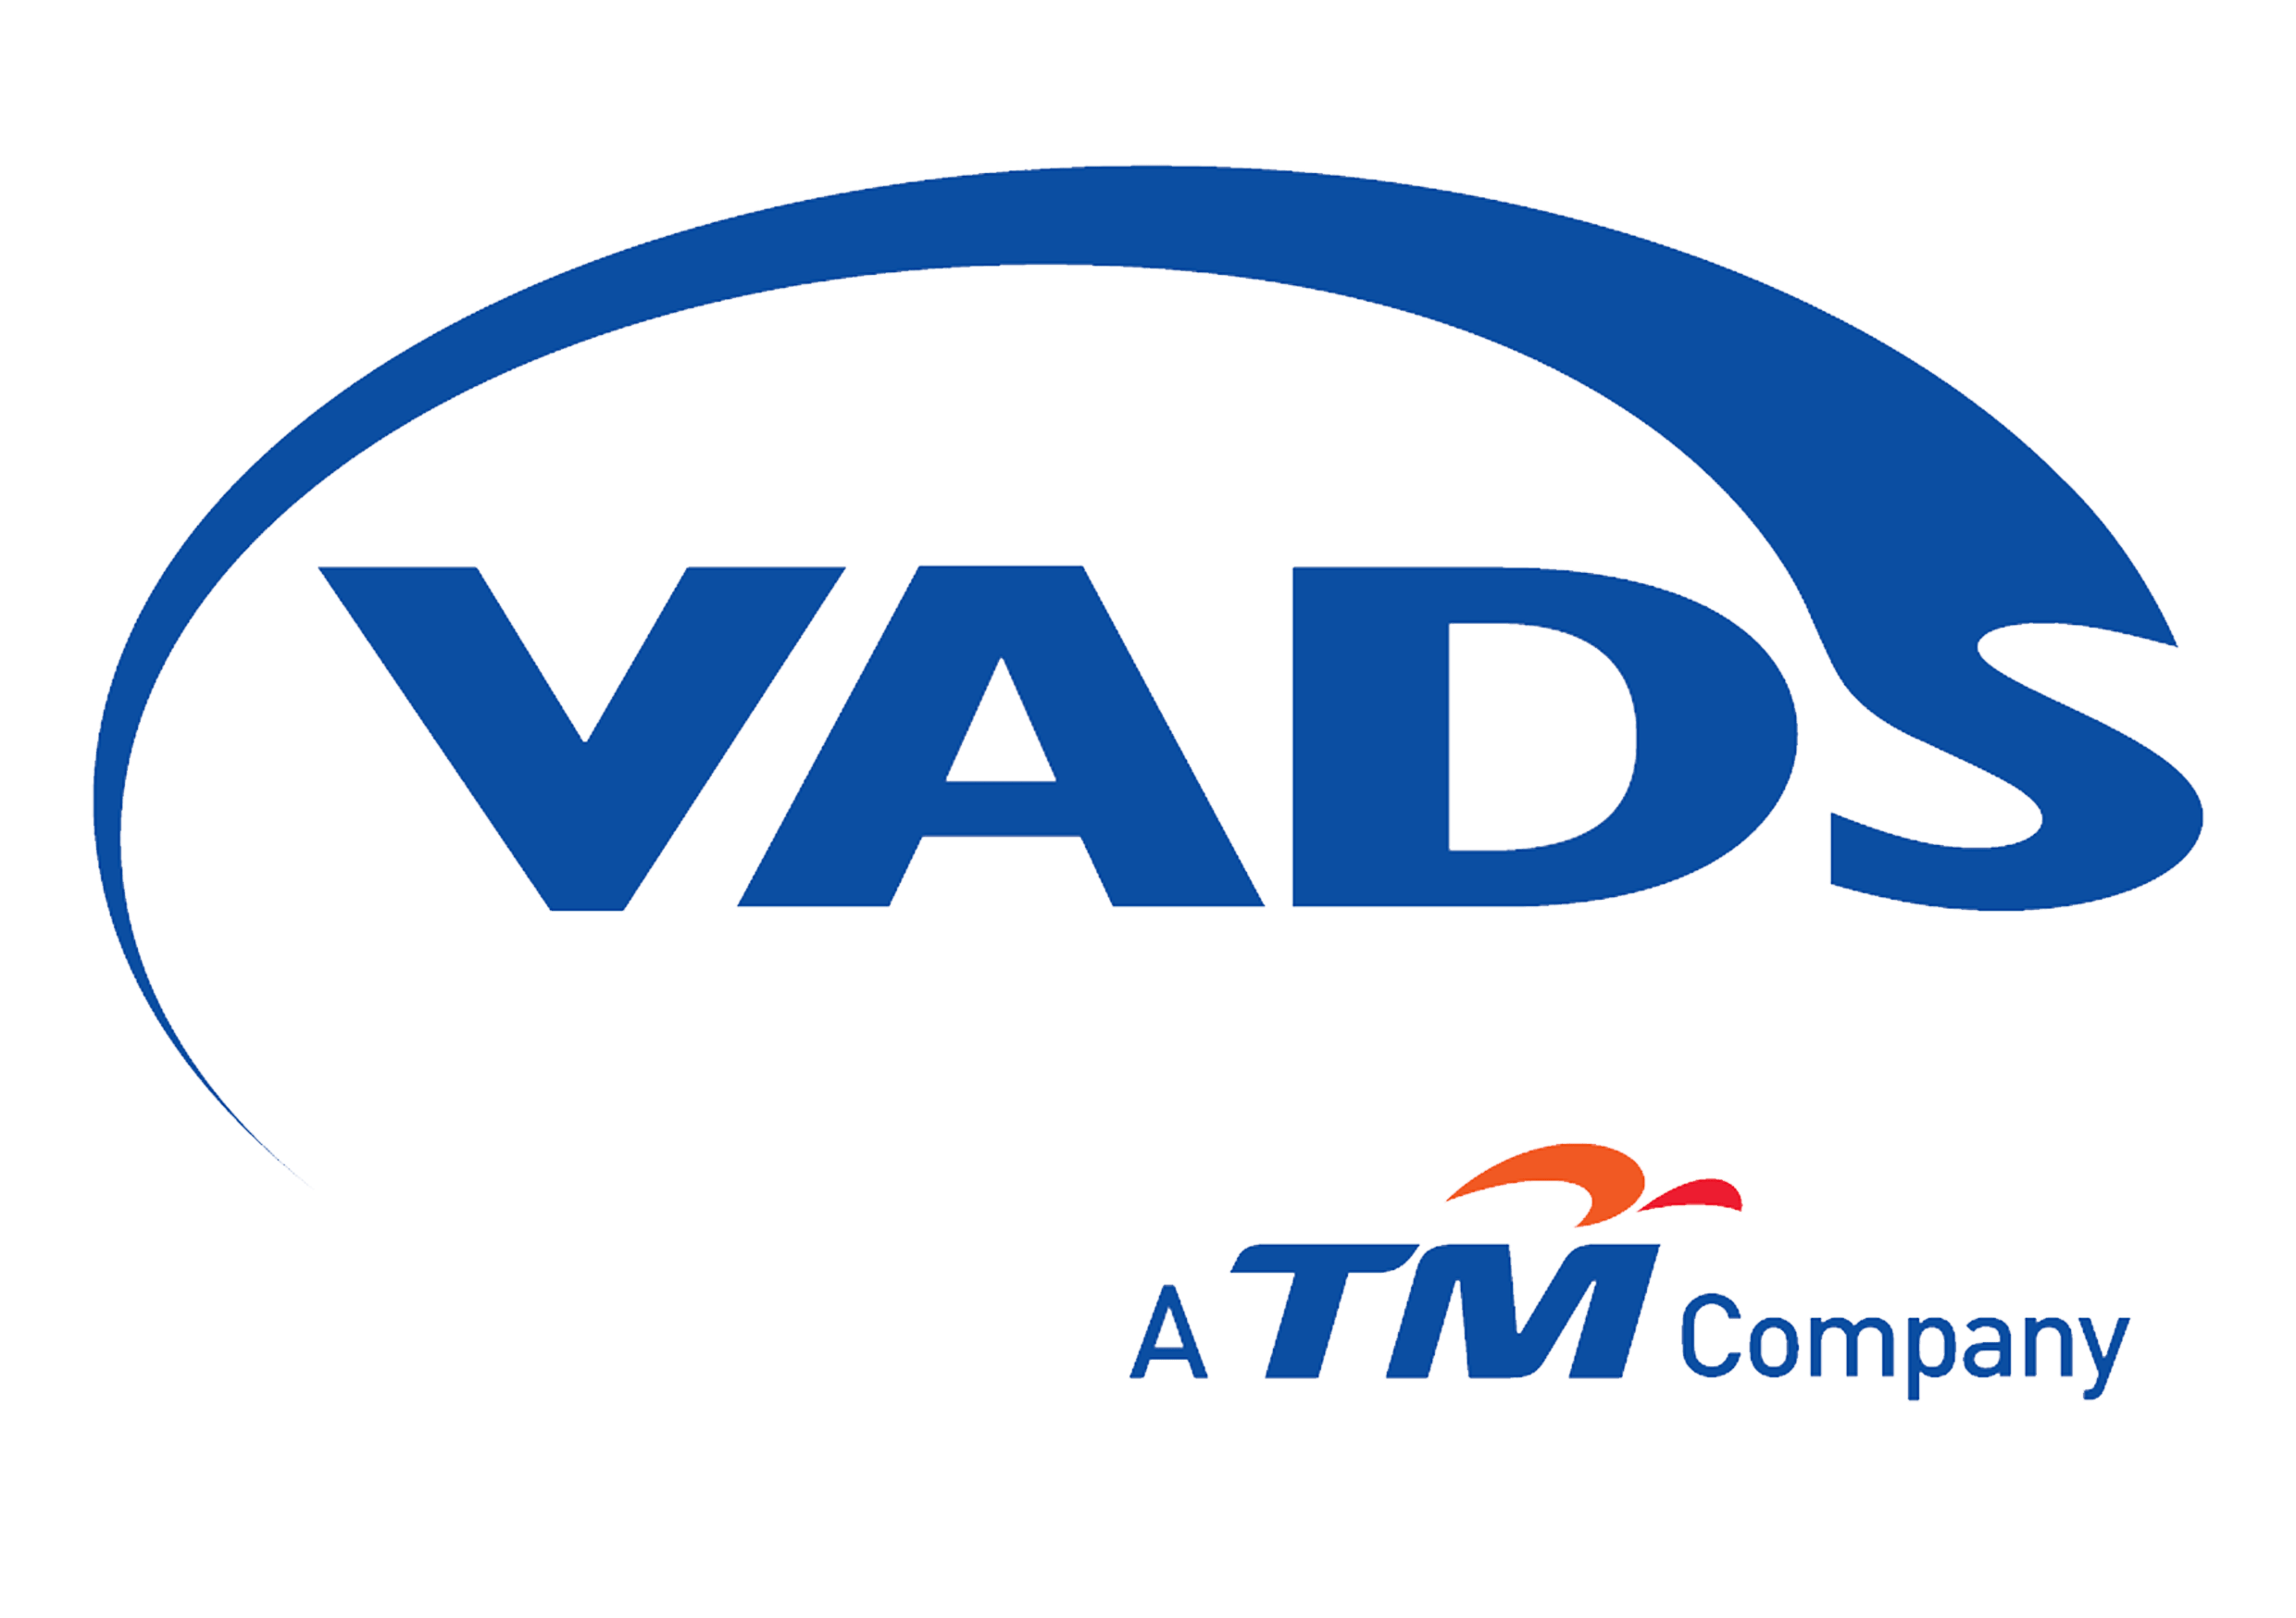 VADS Logo - File:PT VADS Indonesia 2019.png - Wikimedia Commons